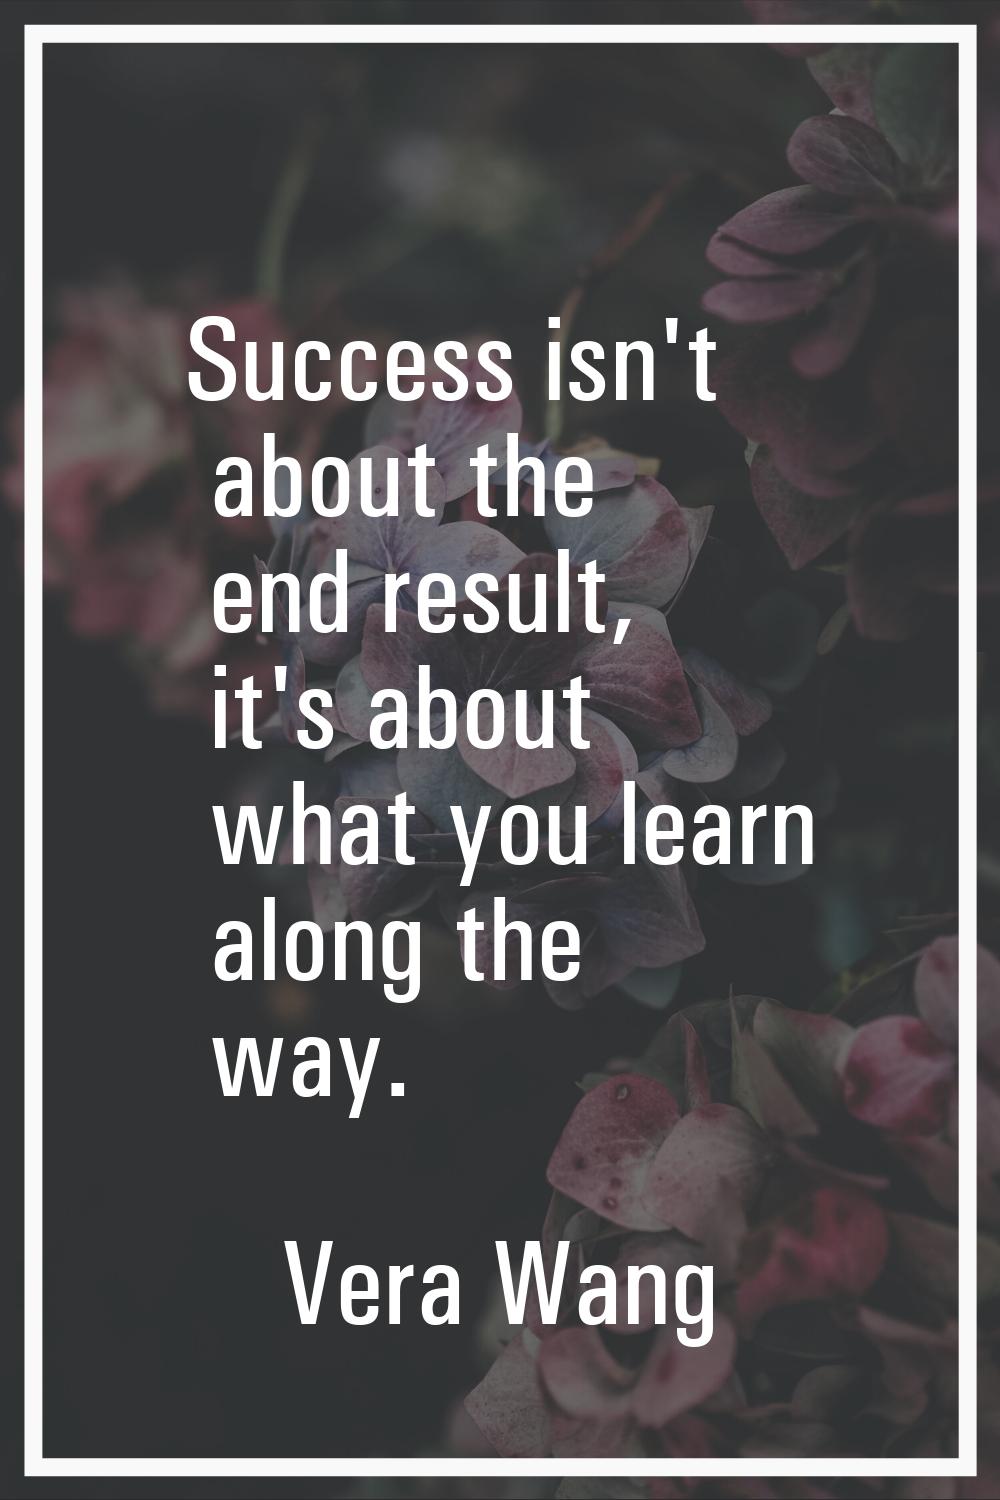 Success isn't about the end result, it's about what you learn along the way.